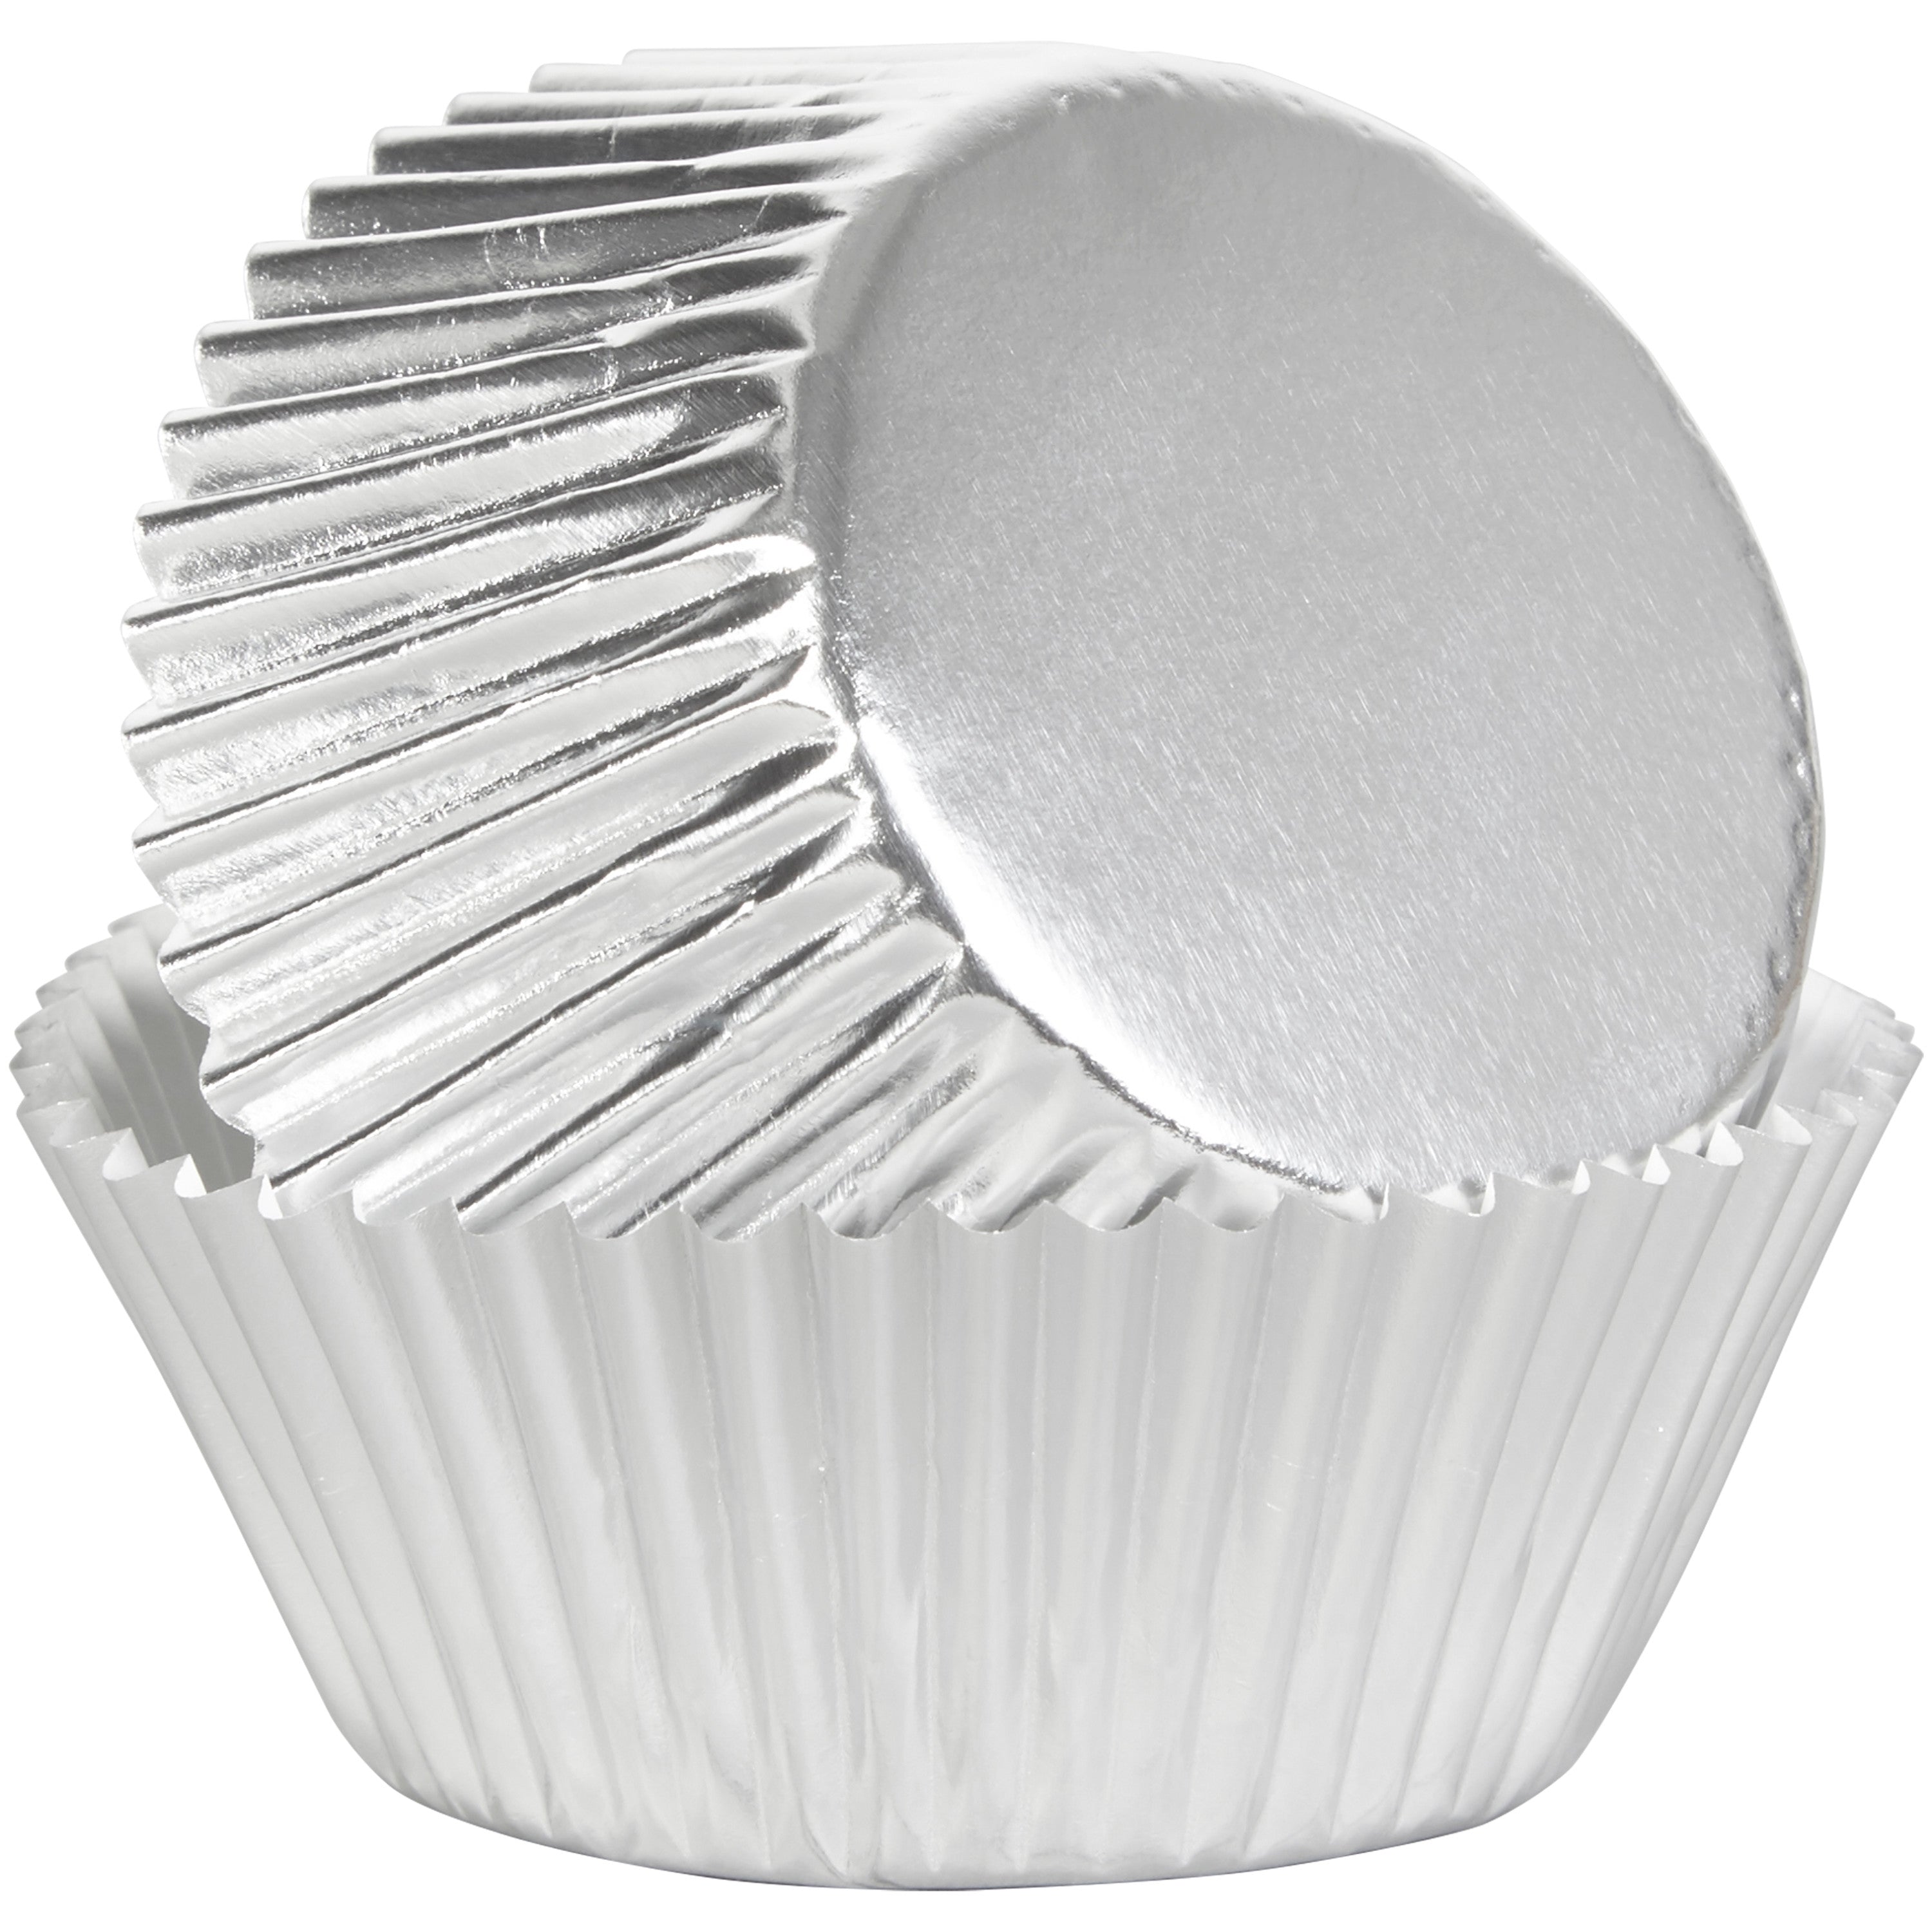 Cupcake Liners Silver,GOLF Standard Size Silver Foil Cupcake Liners  Wrappers Metallic Baking Cups ,Muffin Paper Cases, 100 Pack